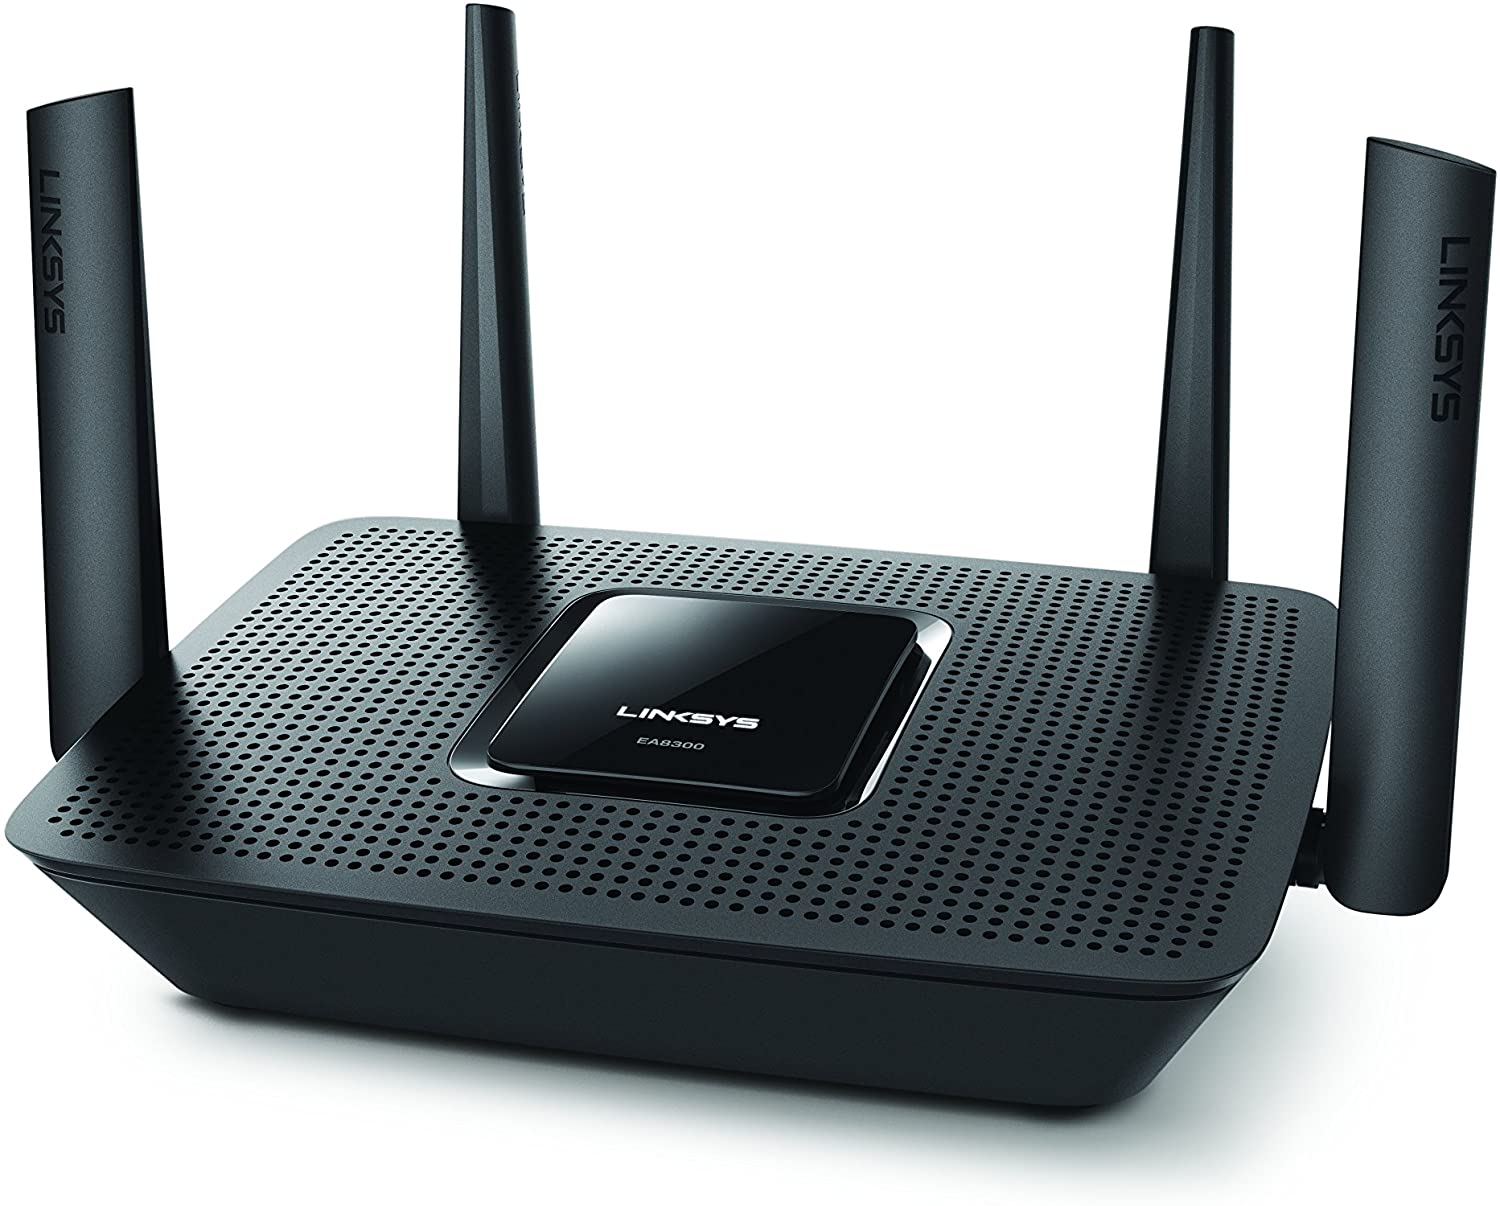 Linksys Tri-Band WiFi Router for Home (Max-Stream AC2200 MU-MIMO Fast Wireless Router)